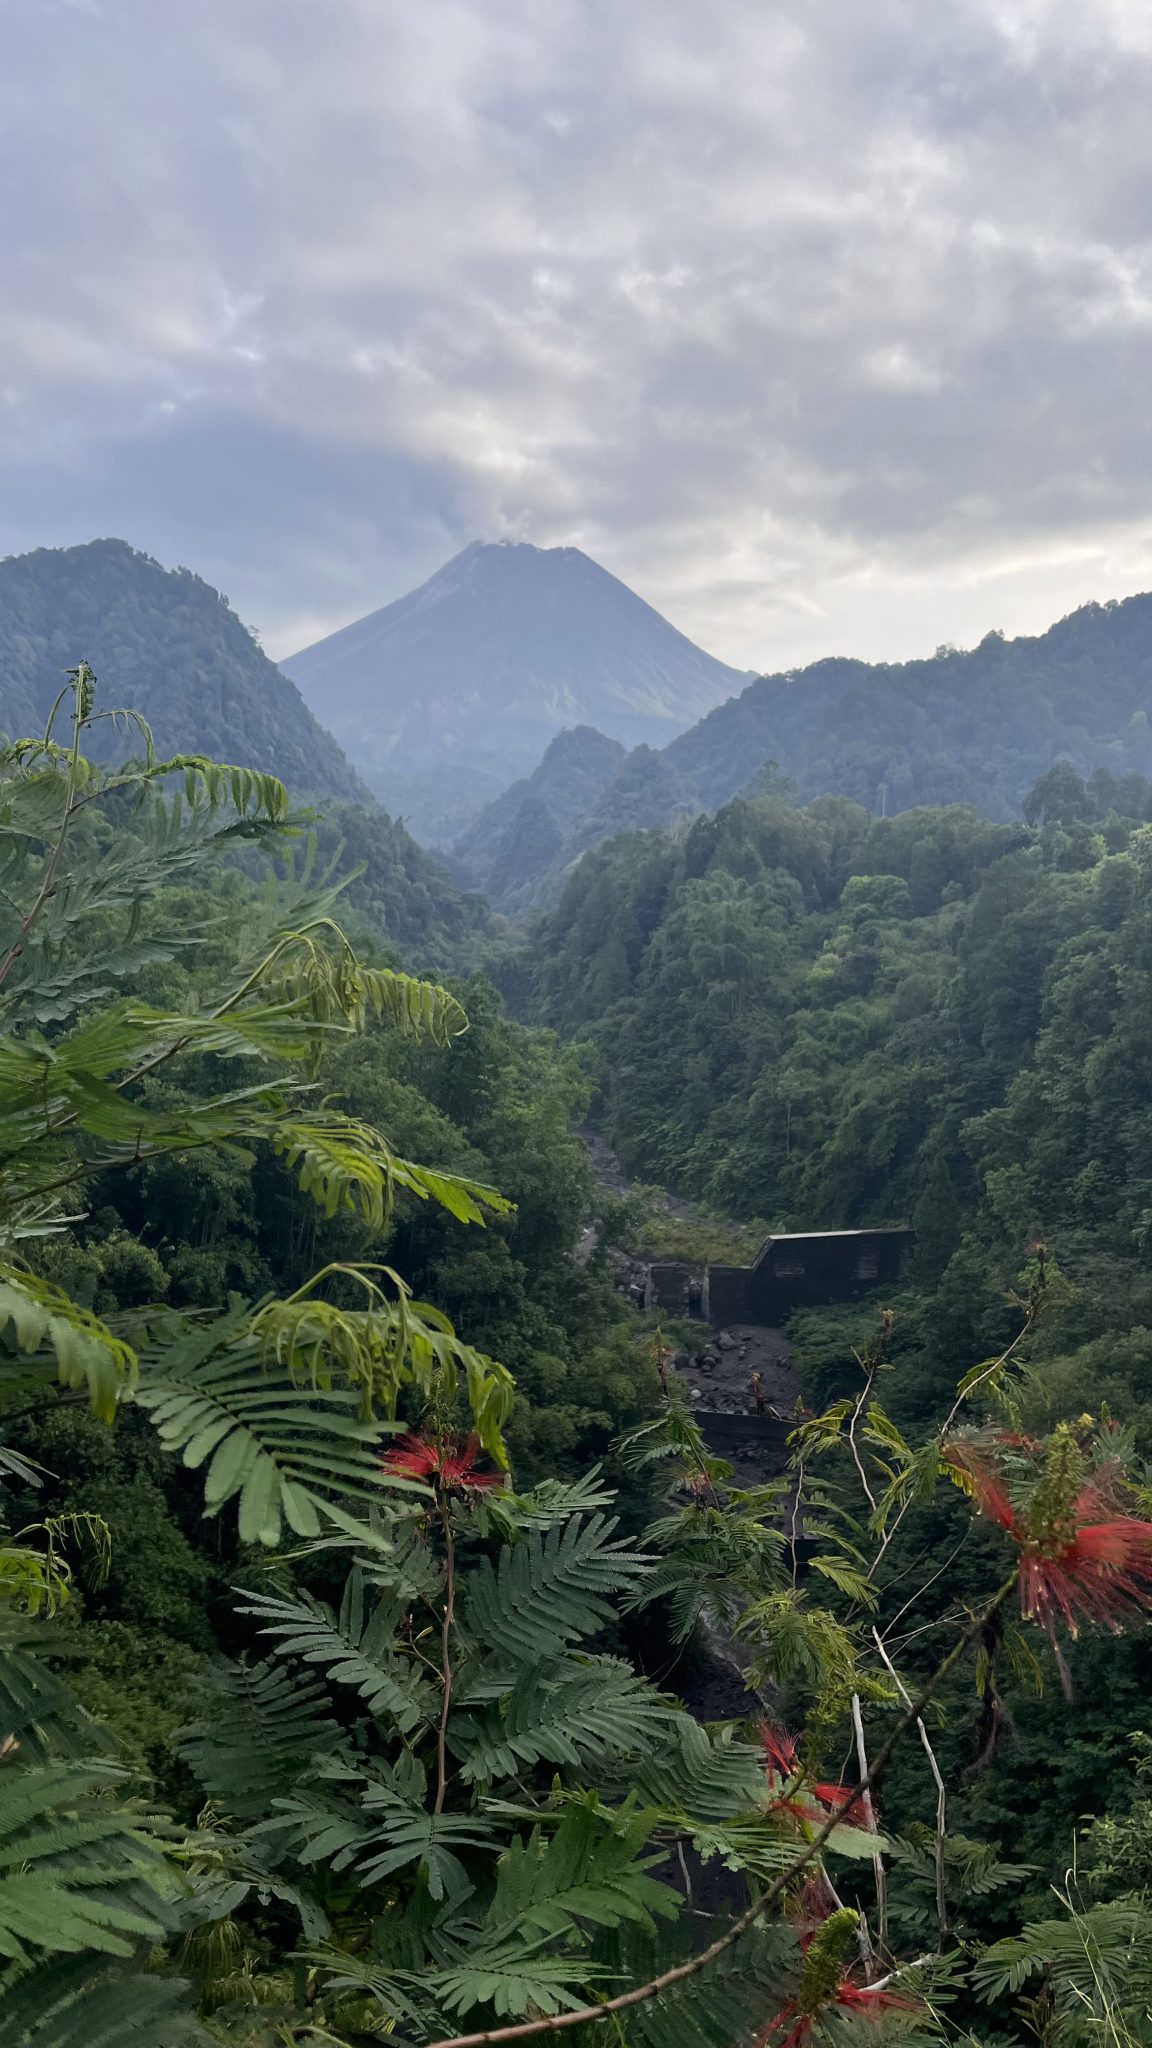 Photo of Mount Merapi volcano taken from Nawang Jagat camping area,  Yogyakarta, Indonesia. View down a long valley filled with greenery, volcano on the horizon dominating the picture, smoke coming out the top.